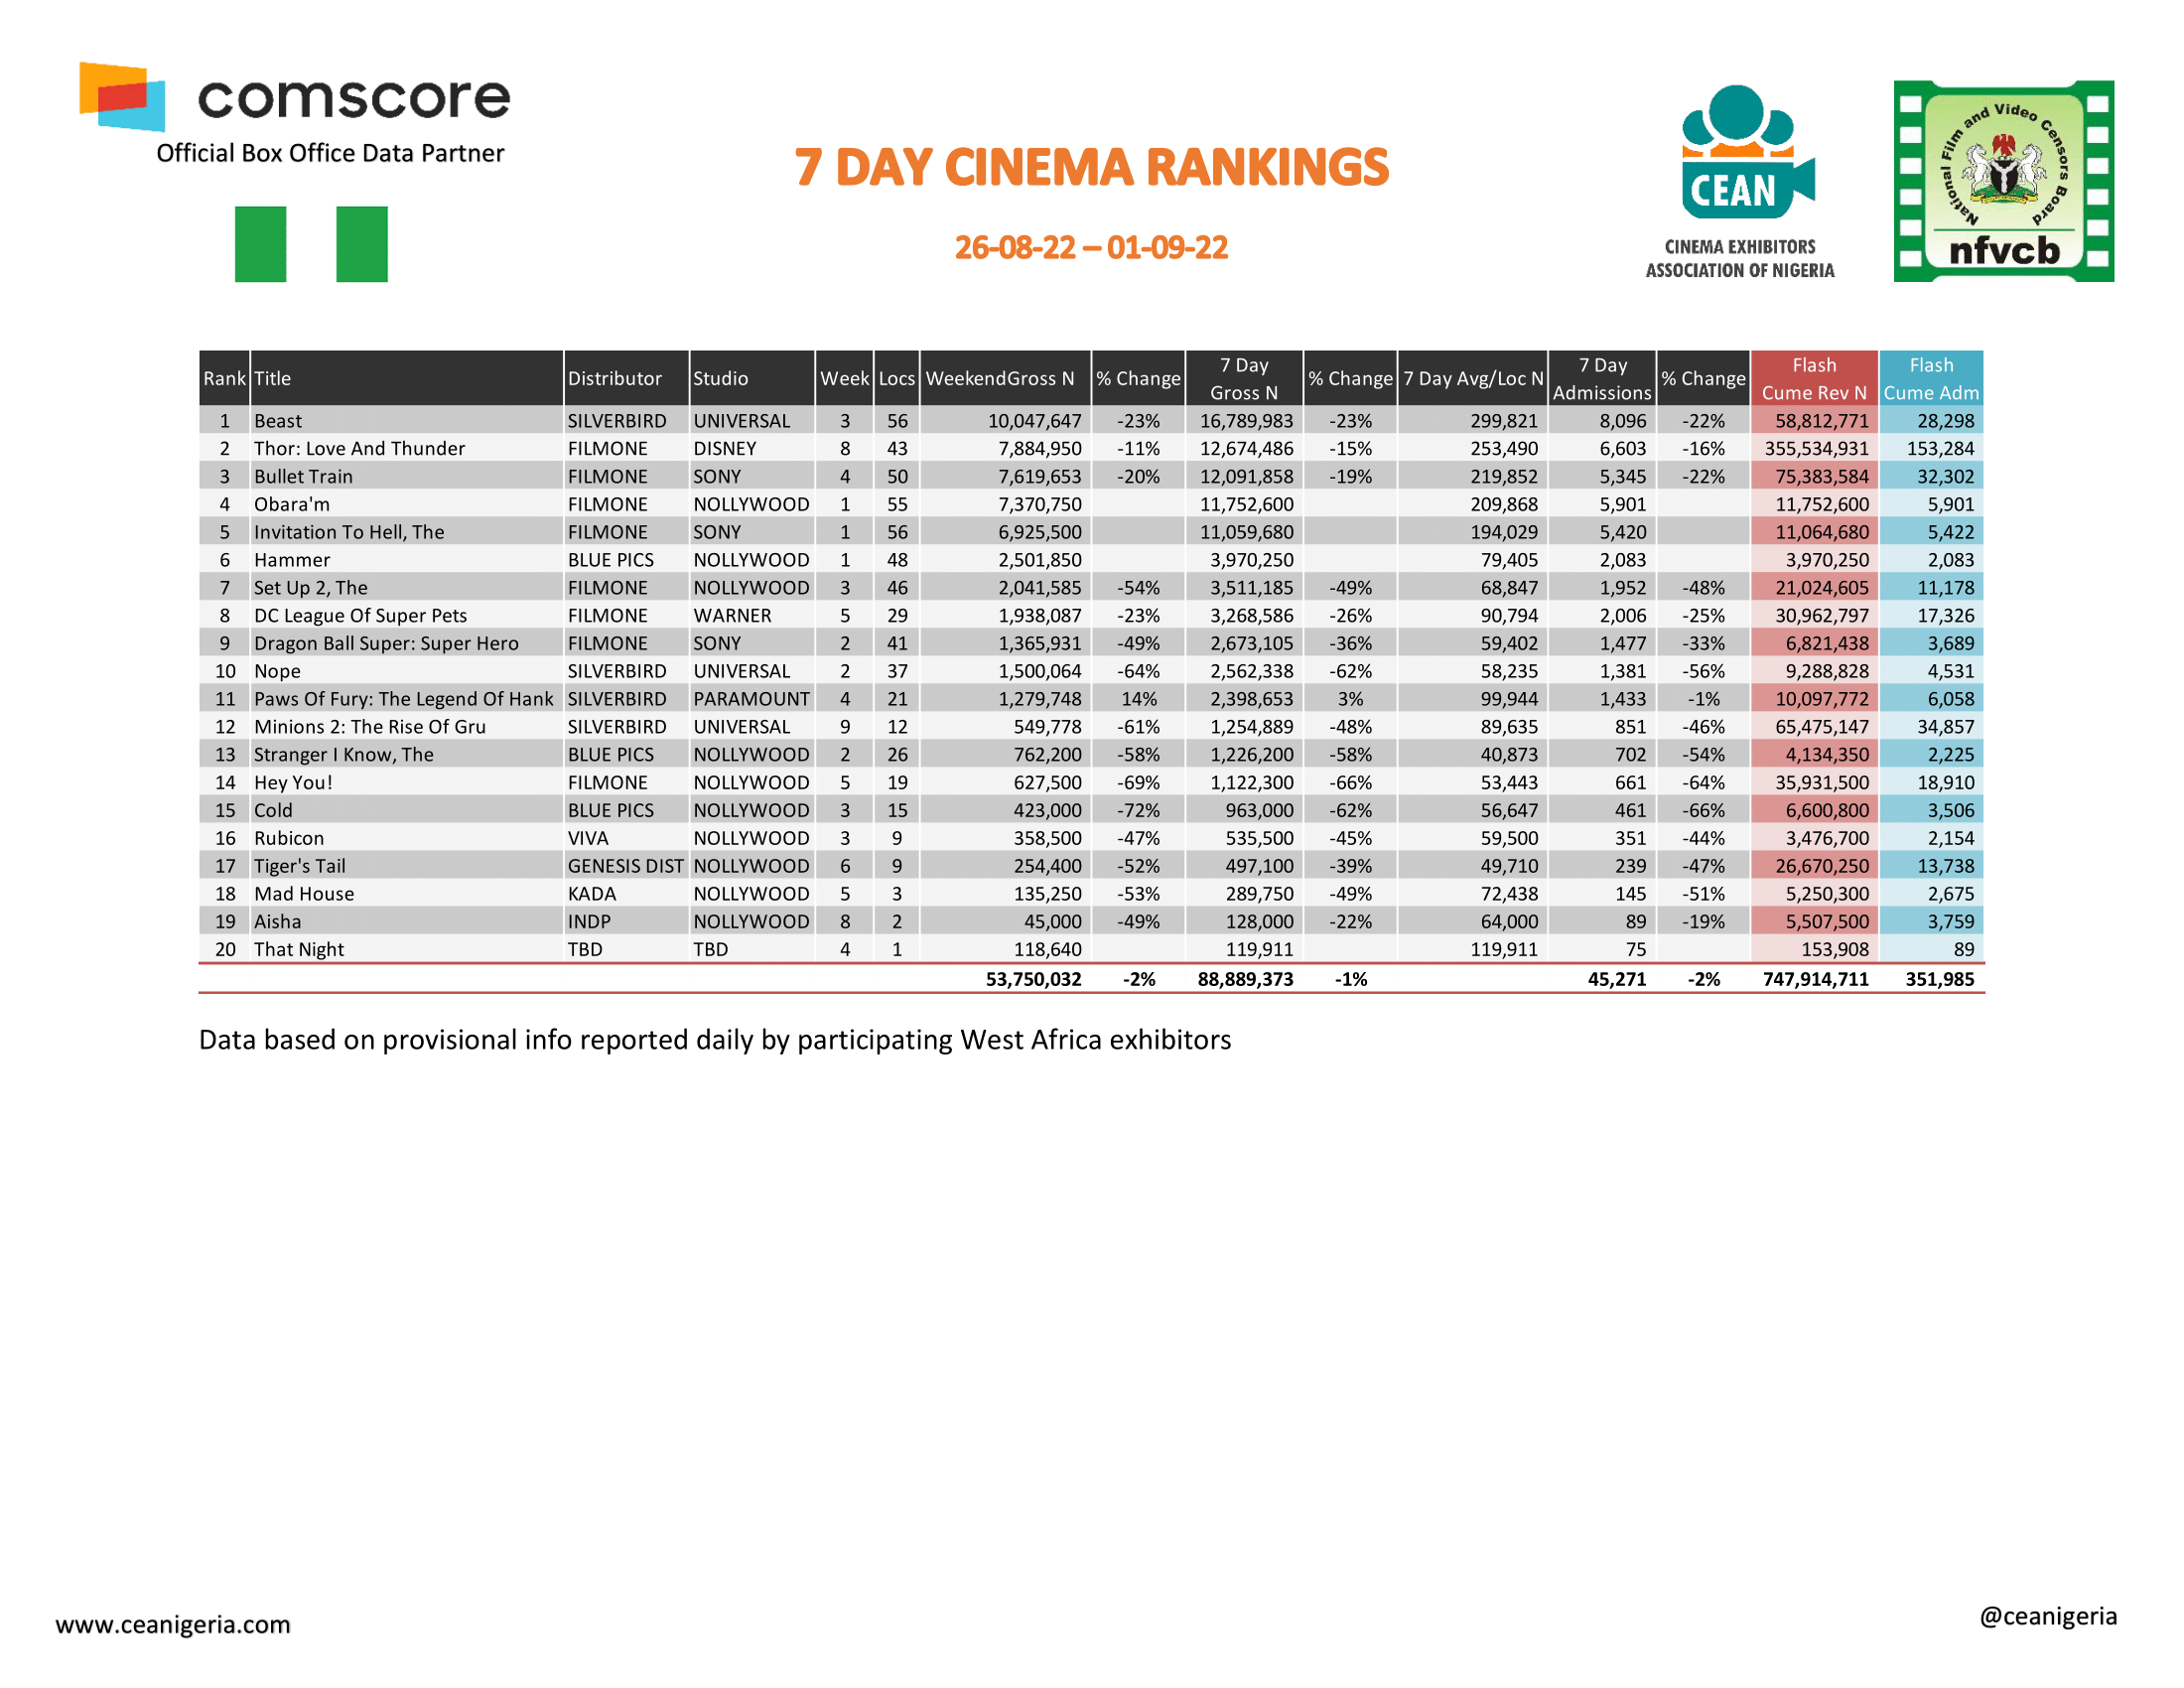 Top 20 films 7 Day 26th August 1st September 1